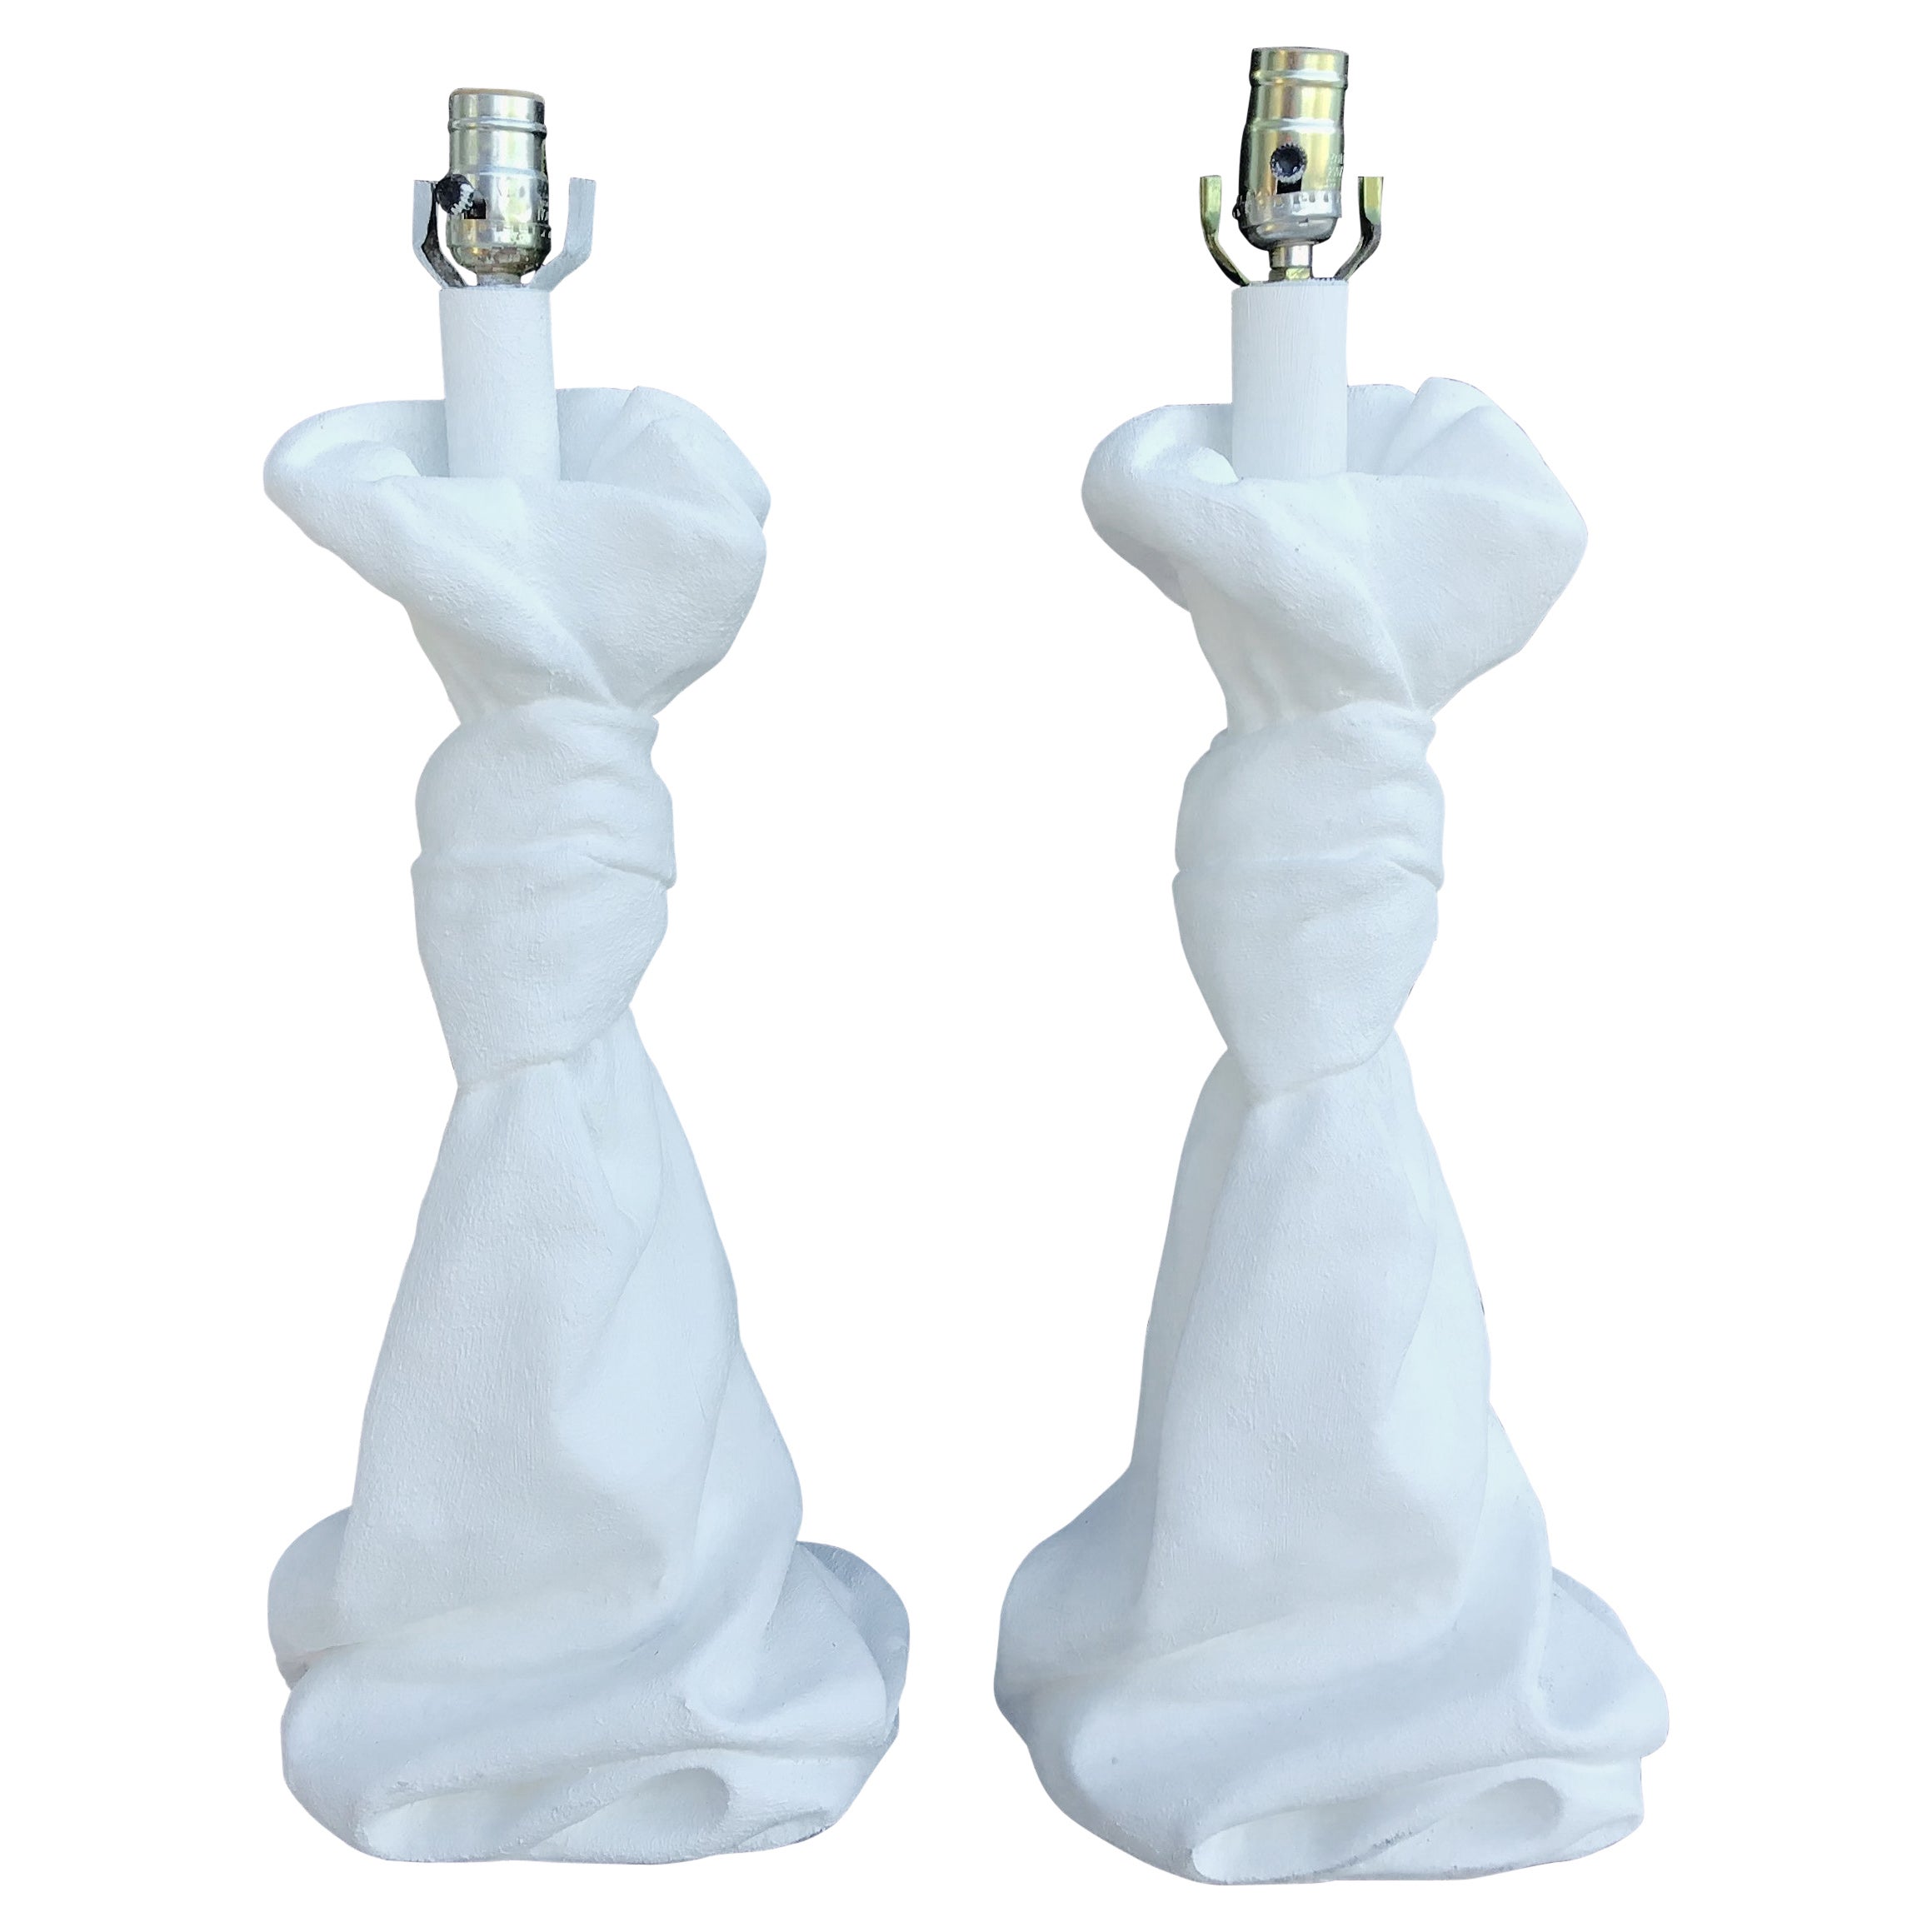 1970s John Dickinson Style Draped Plaster Table Lamps, a Pair